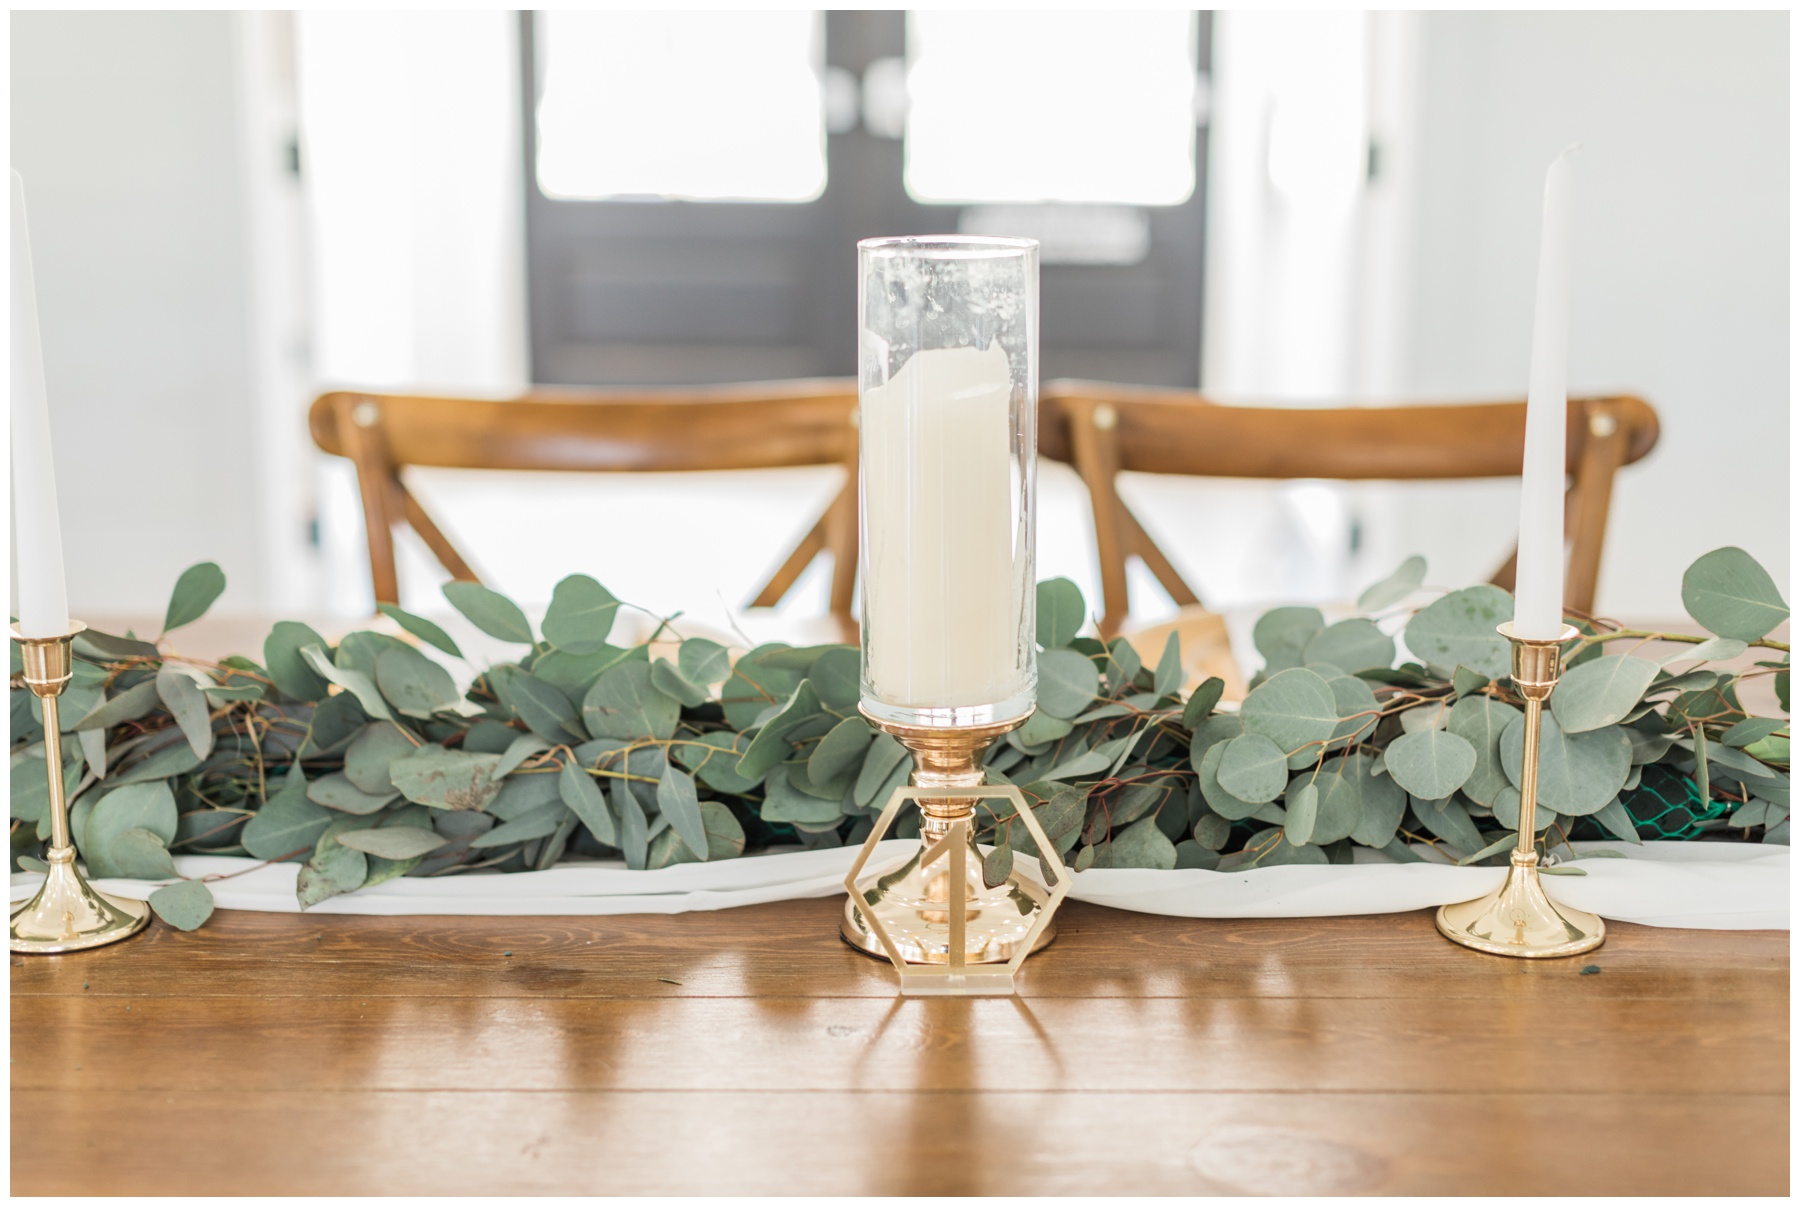 Gold plates, white and gold candles, and a eucalyptus runner for a modern wedding reception